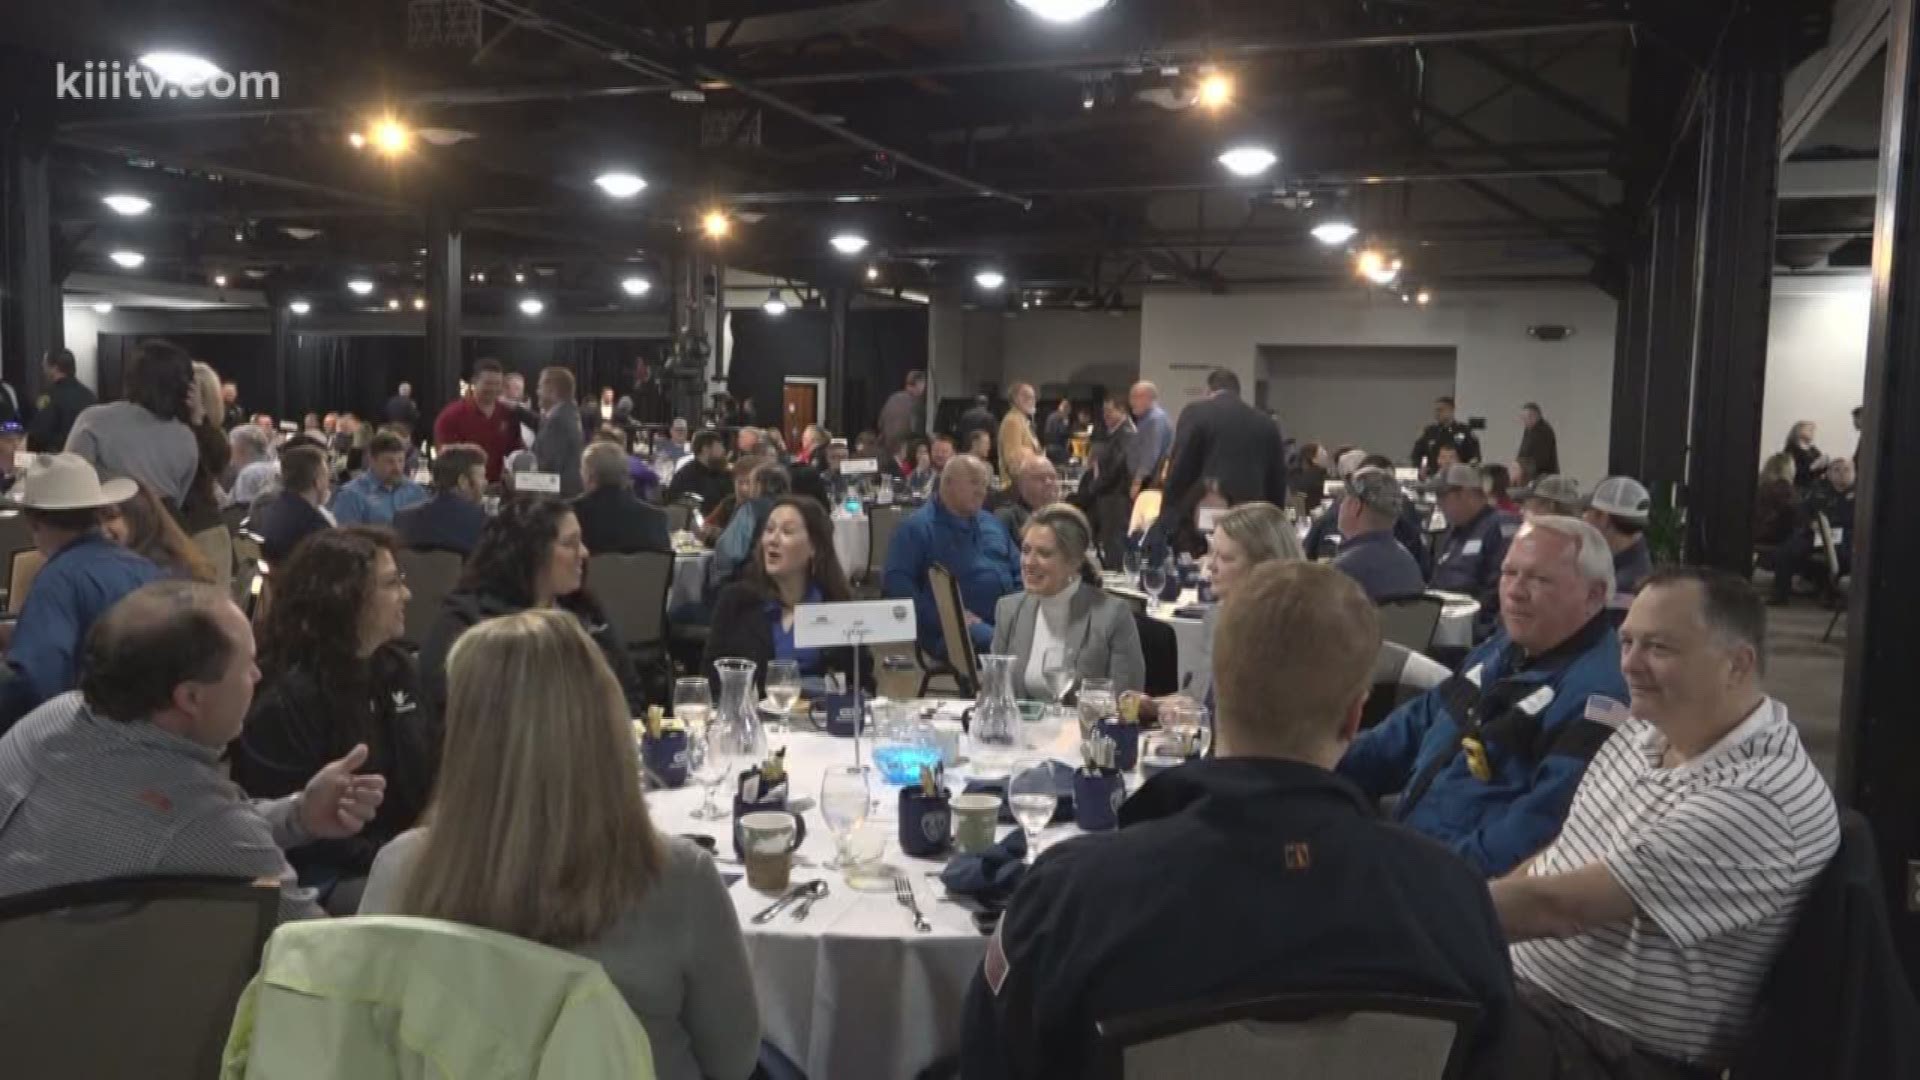 It was a special event aptly titled "Breakfast with the Chief", which serves as the biggest fundraiser of the year for the Corpus Christi Police Foundation, a group that helps pay for extra equipment and training for police officers.